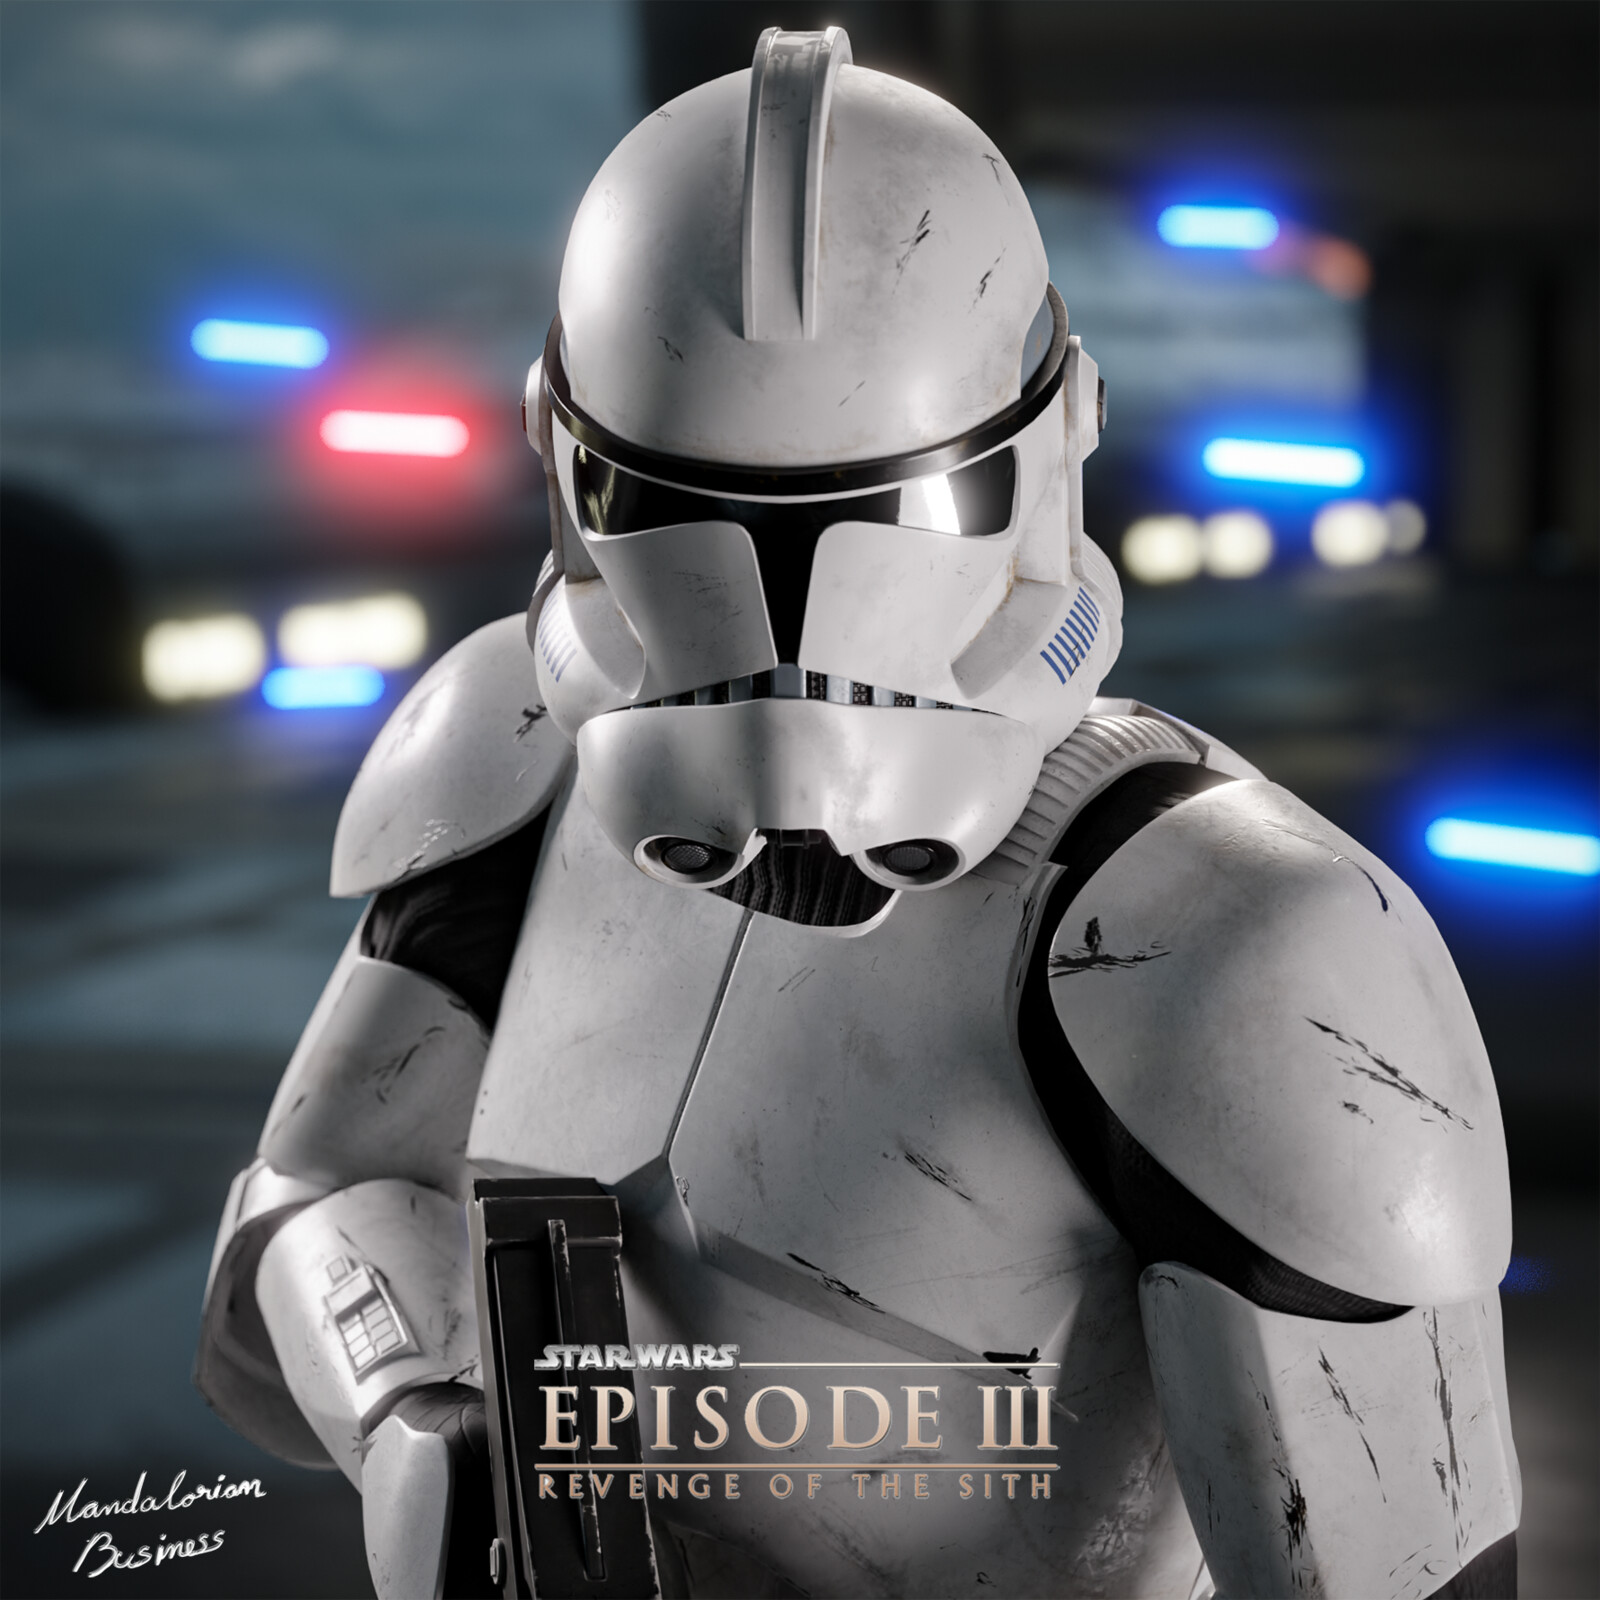 Iosif Puia - The Finest of the 501st Definitive Edition - Star Wars  Battlefront 2 mod